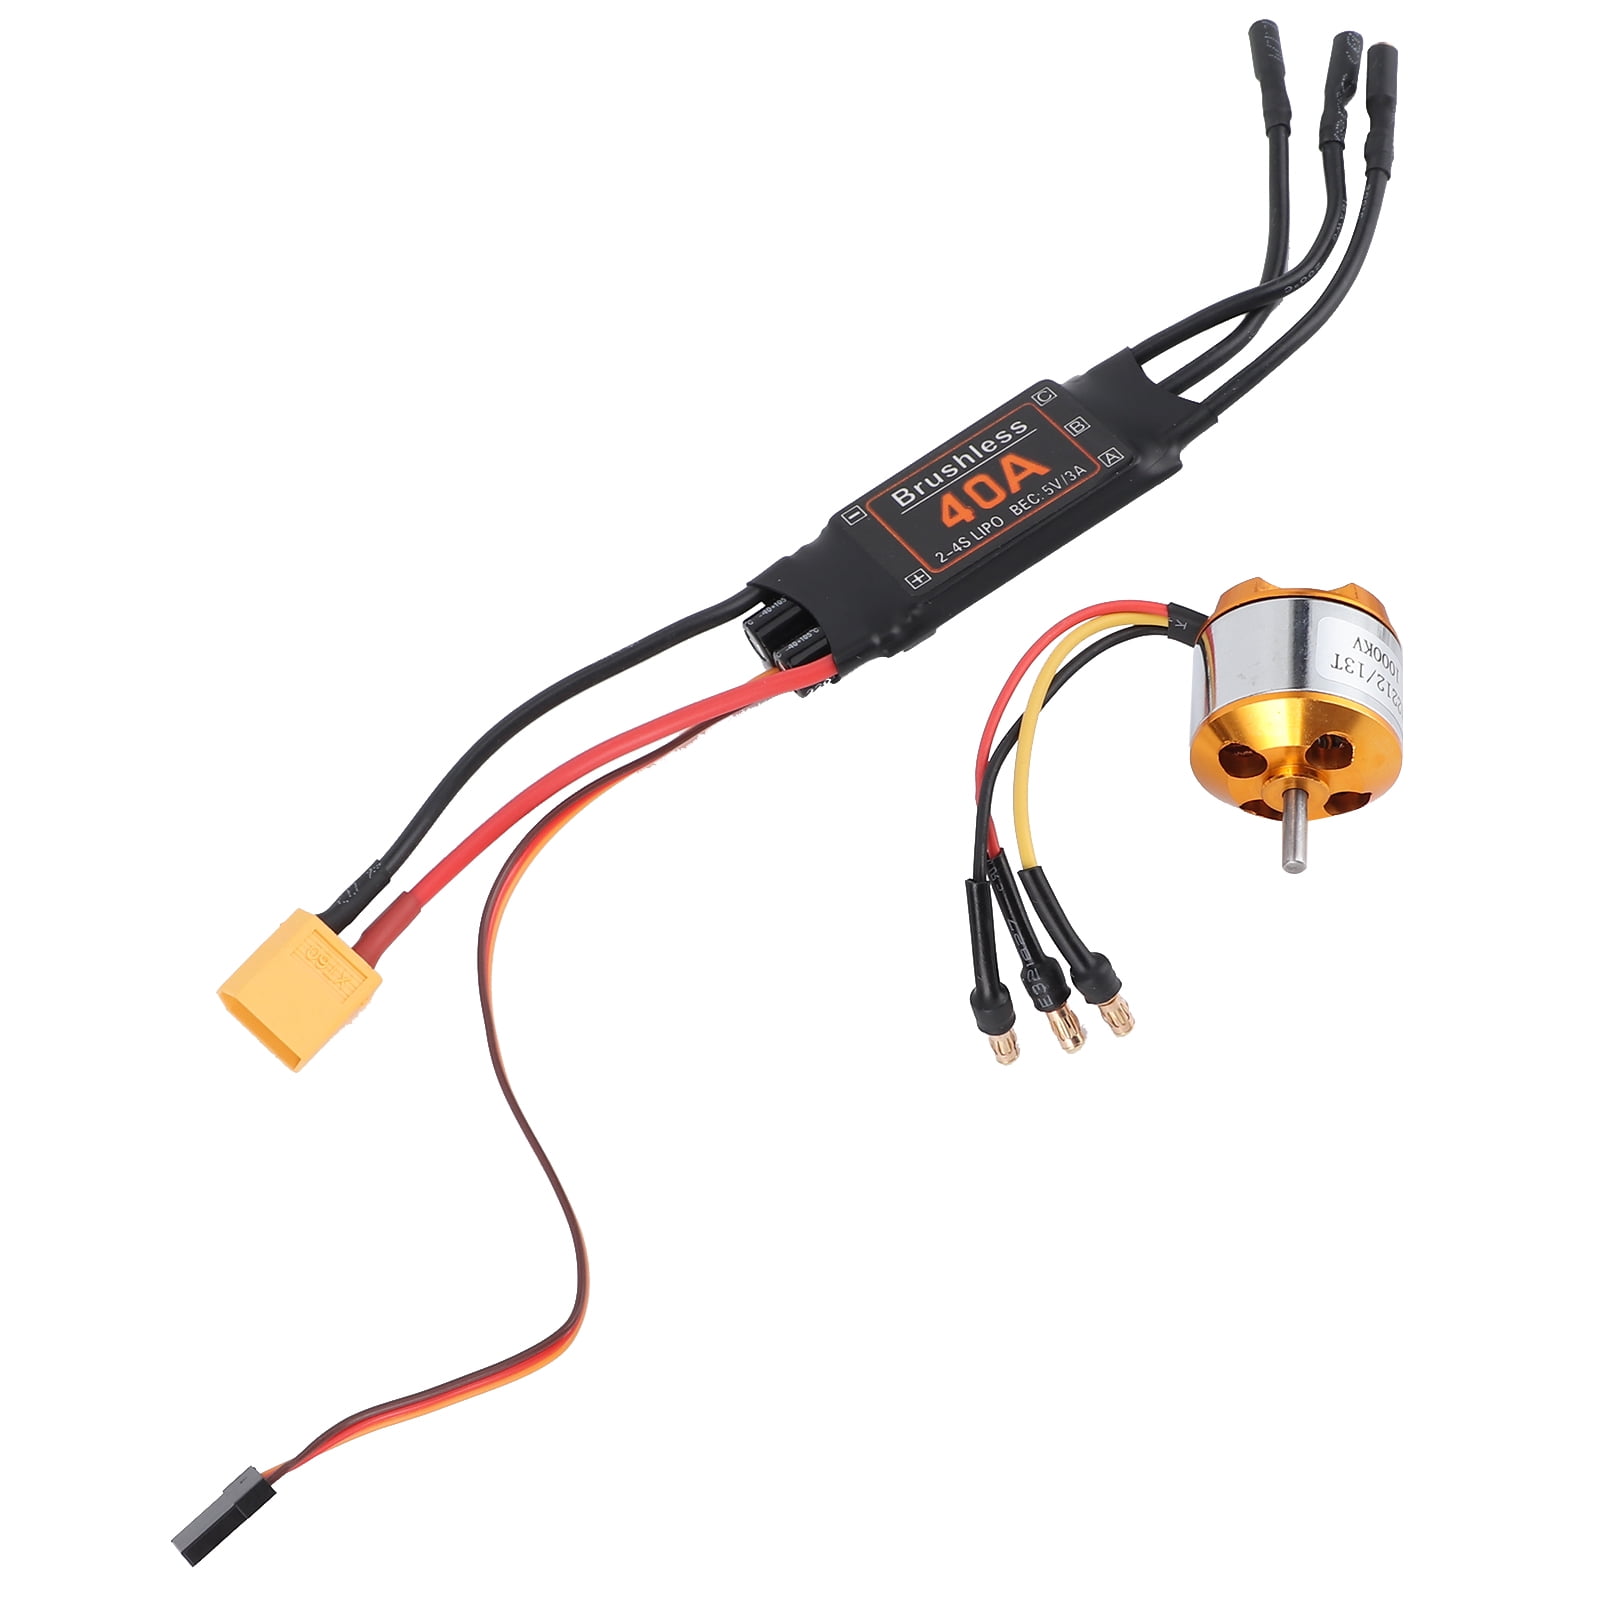 RC Drone Motor Kit,2212 1000KV Motor 40A Brushless ESC Set Accessories for RC Drone Helicopter FPV Model